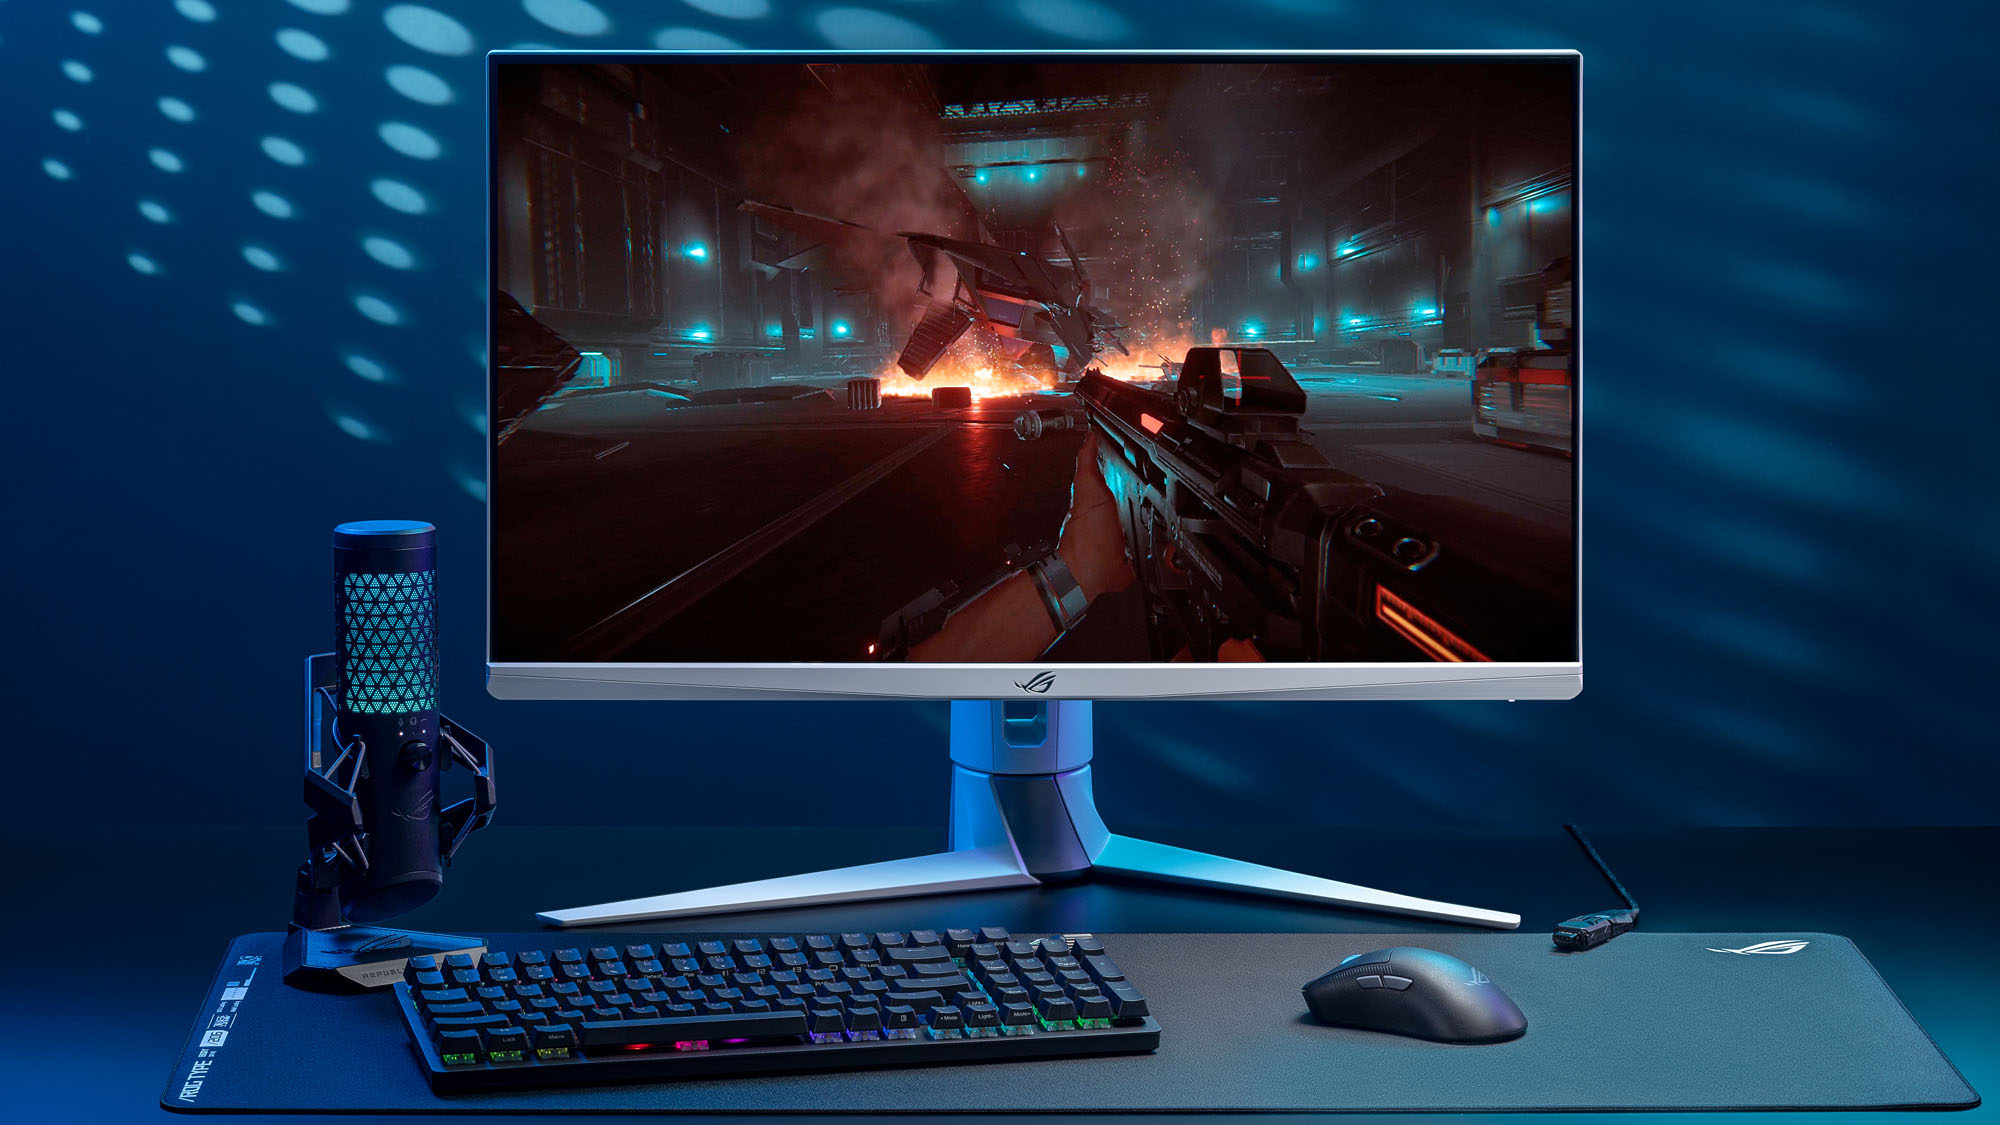 A gaming setup showing a monitor, keyboard, mouse, and microphone.